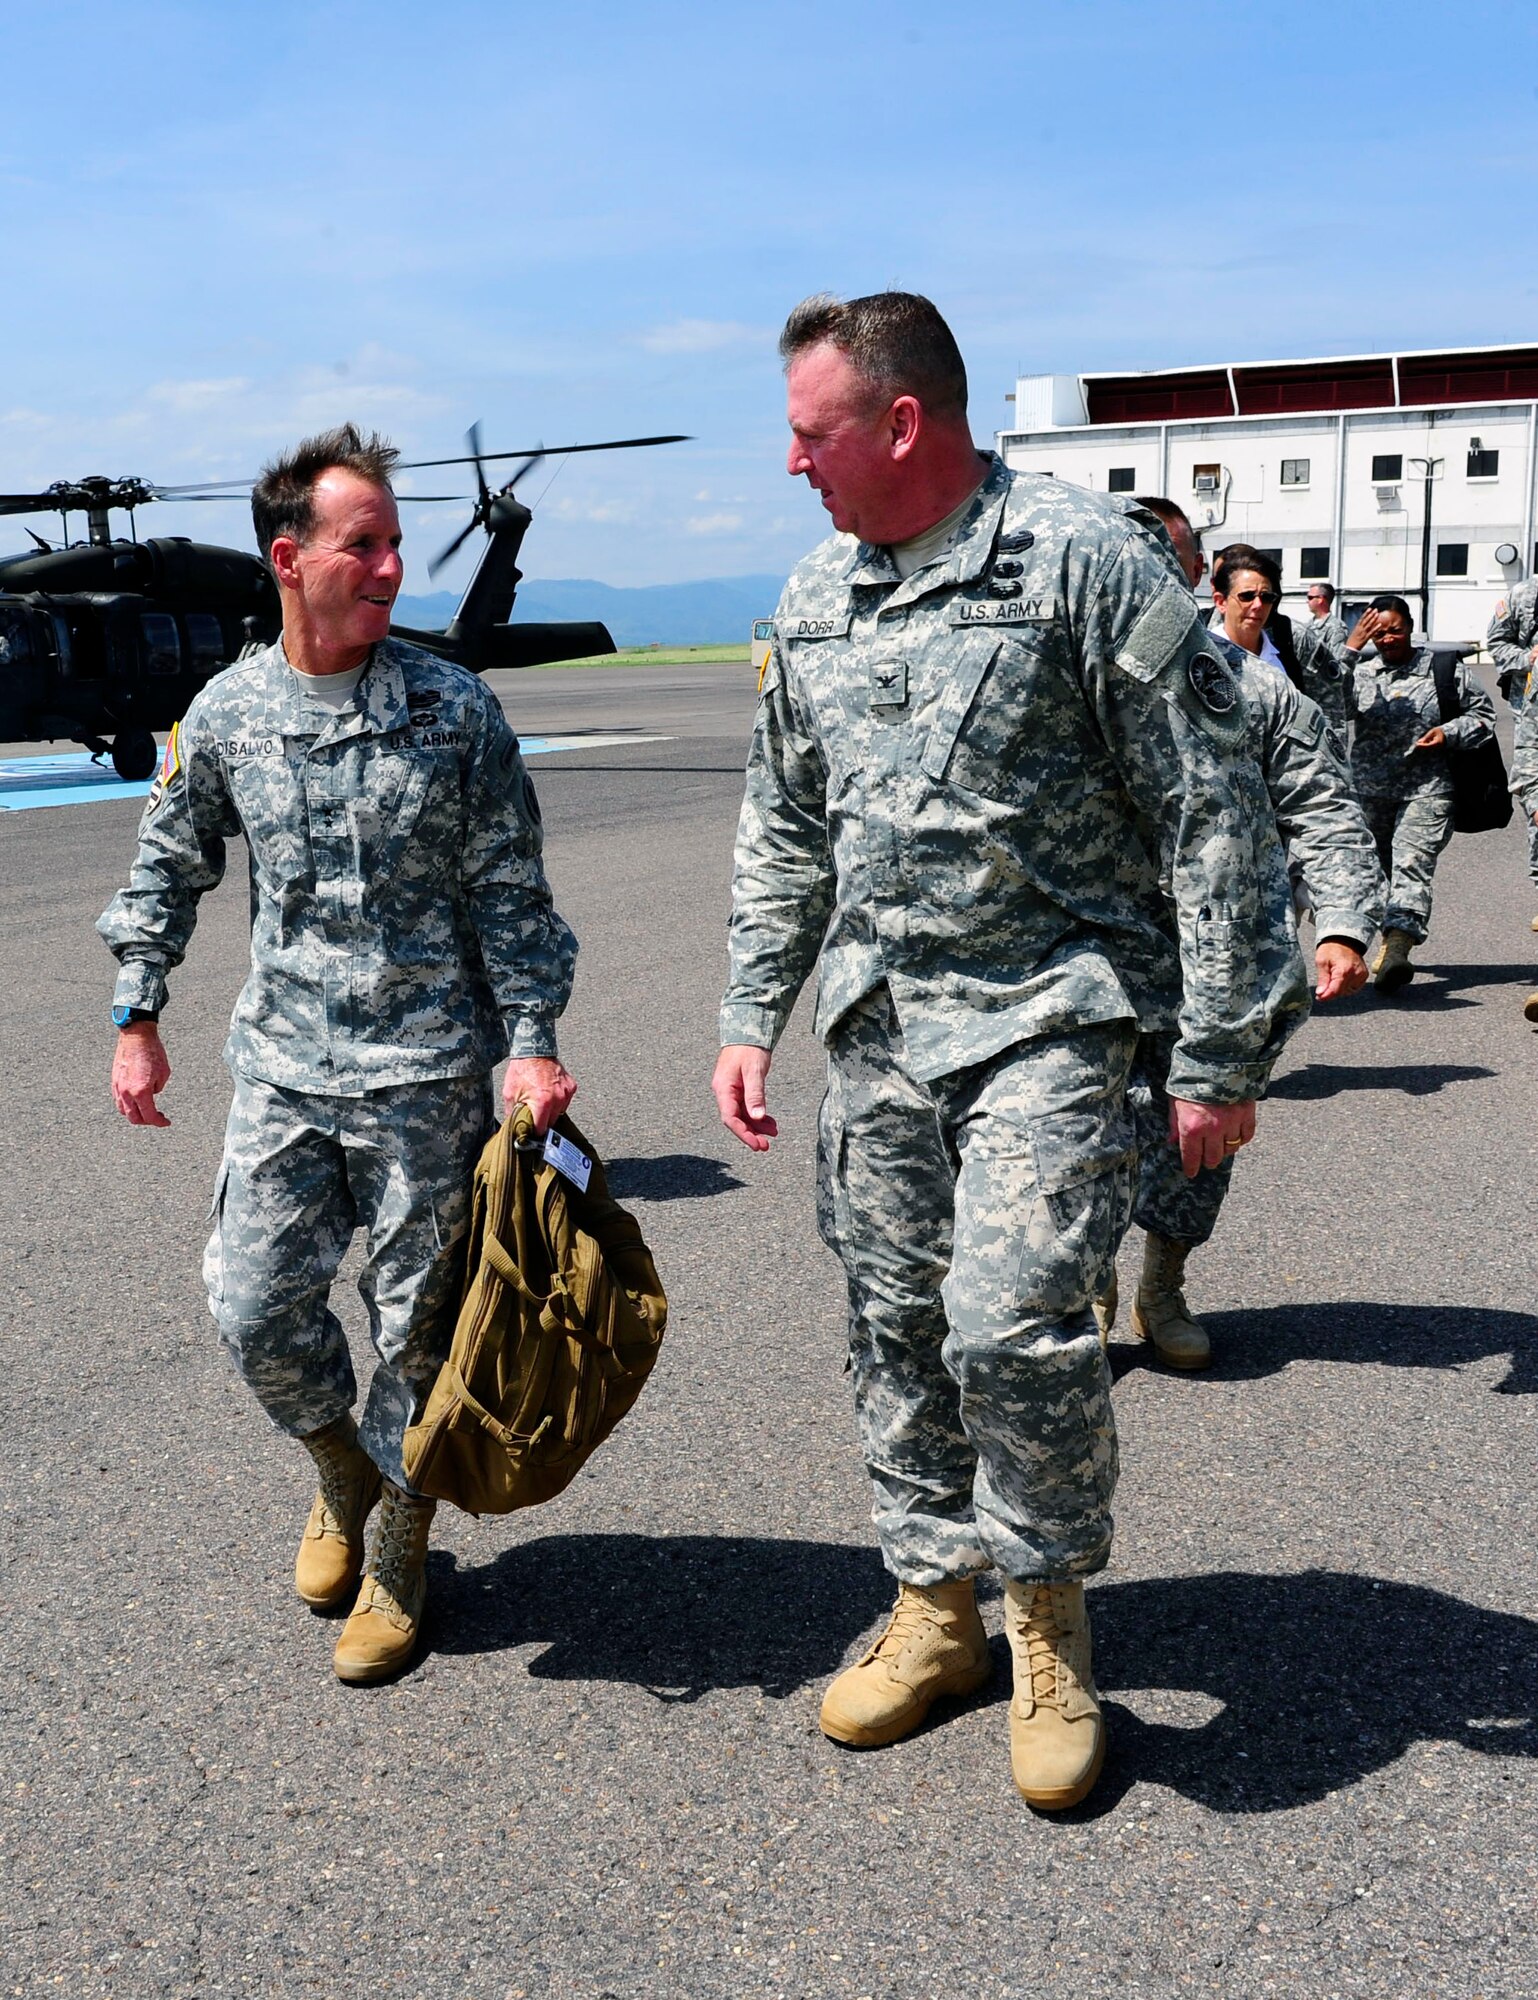 Maj. Gen. Joseph P. DiSalvo, U.S. Army South Commanding General, was greeted by Col. Kirk Dorr, Joint Task Force-Bravo Commander, and Col. Rollin Miller, Army Support Activity Commander, on the flightline at Soto Cano Air Base, Honduras, Oct. 21 2014. Maj.
Gen. DiSalvo visited different areas of the post to learn more about the continued efforts to upgrade infrastructure and to recognize personnel for their accomplishments (Photo by Martin Chahin)
